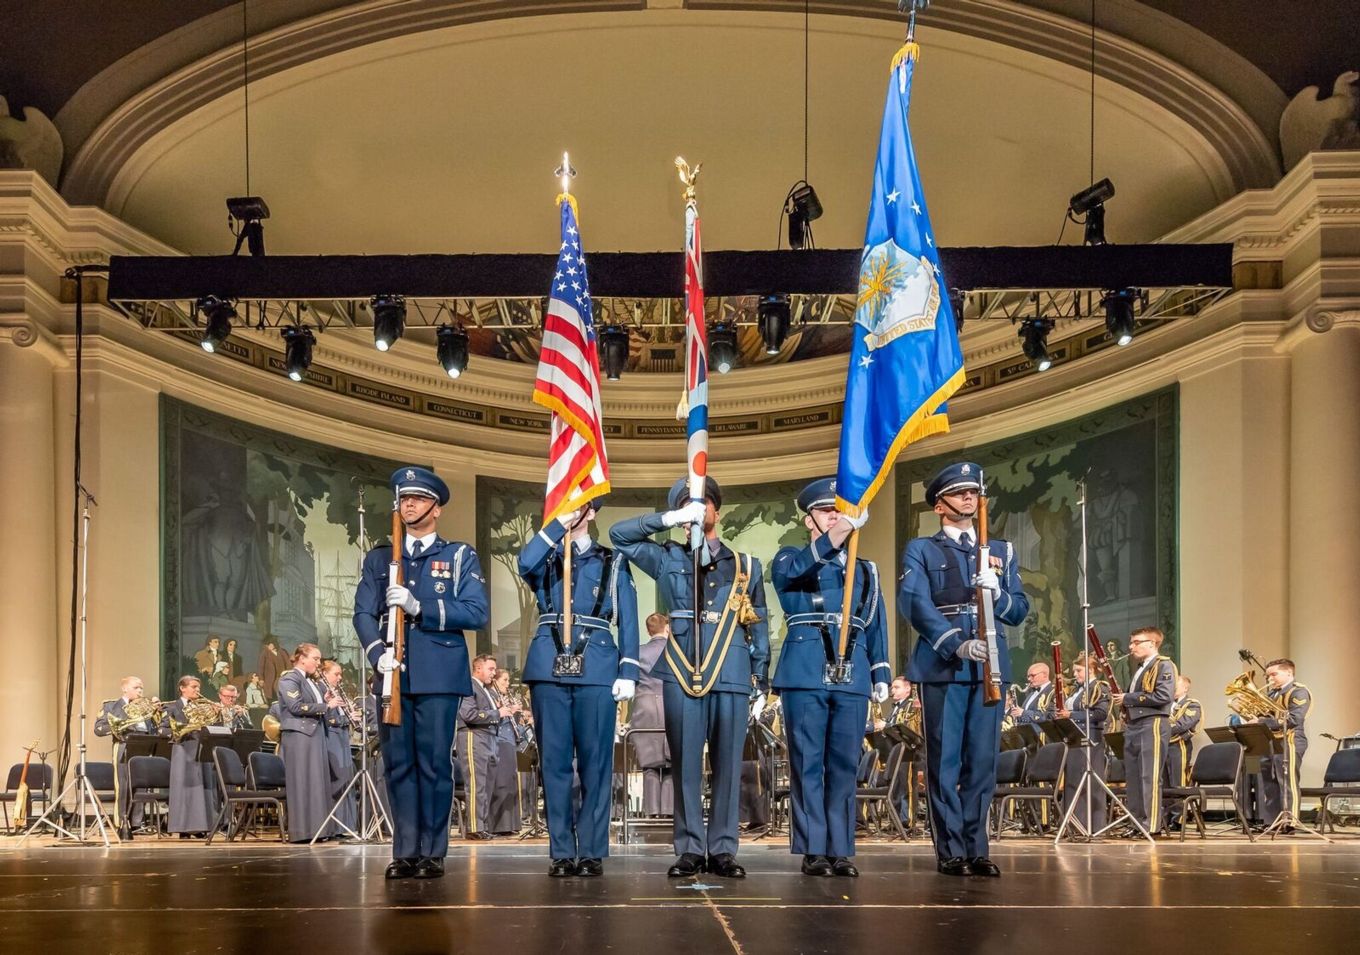 Five officers stand on a stage with flags and insignia.